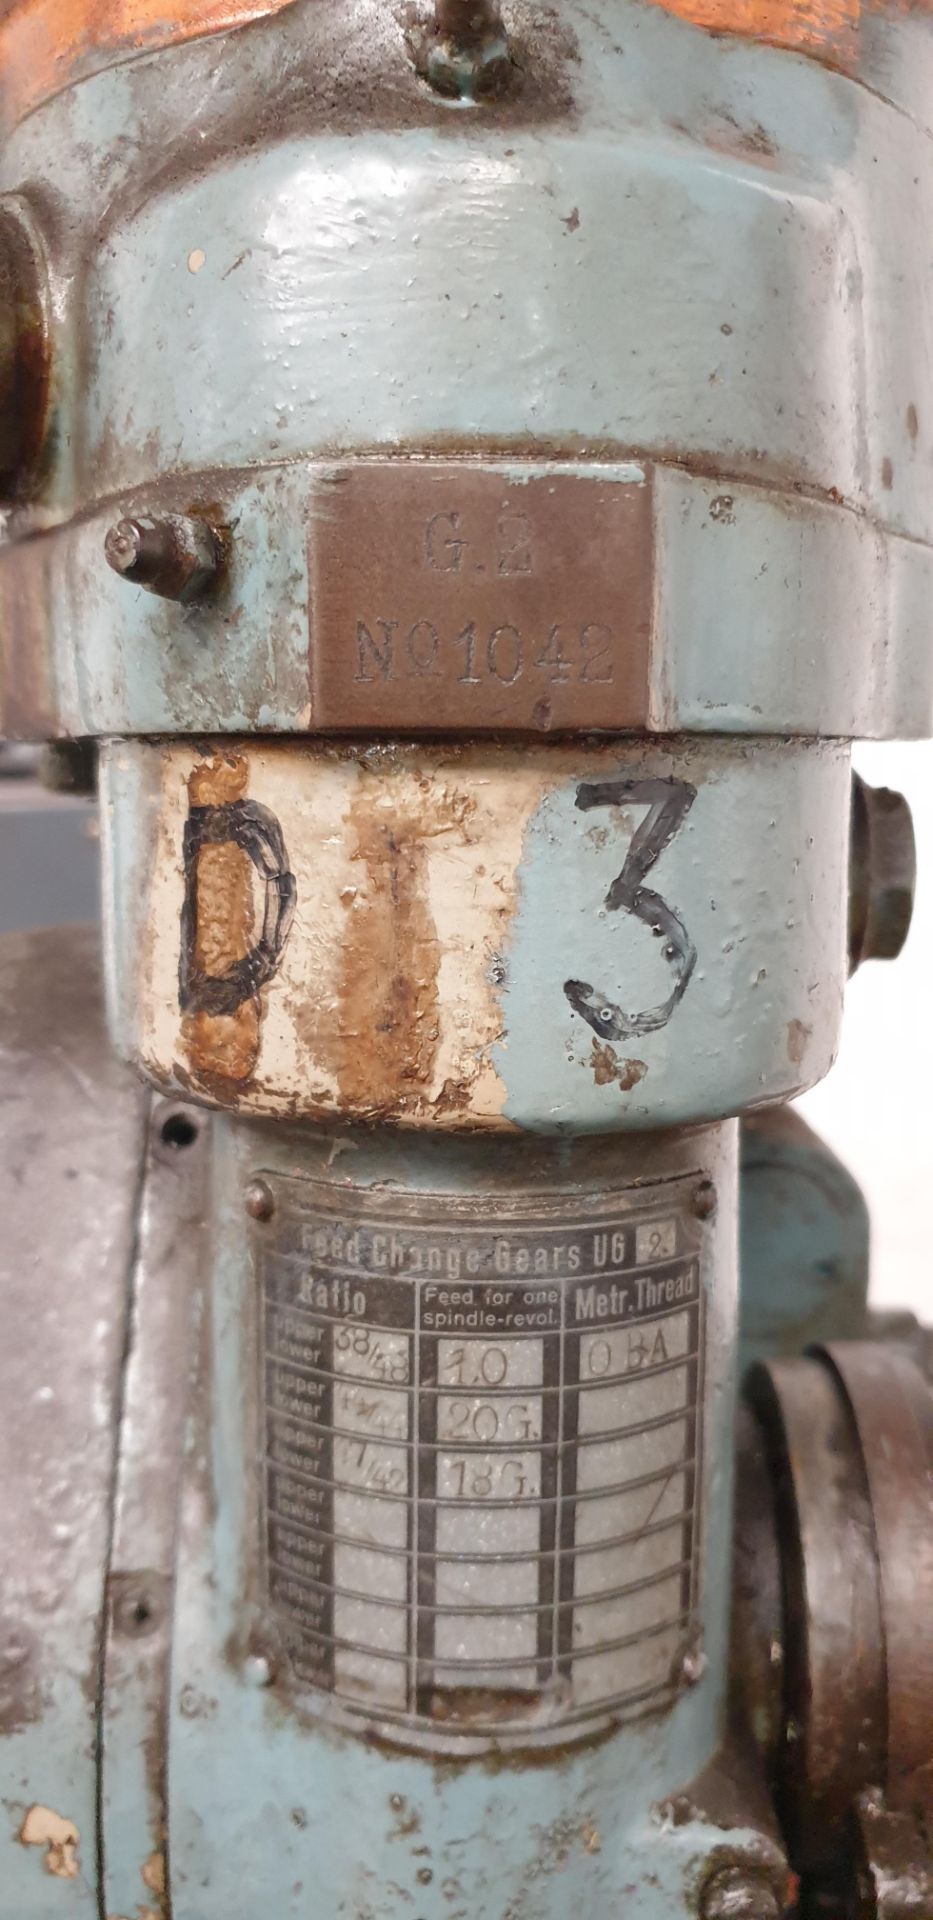 Wilcox Drilling Machine, Model And Serial No. Unknown - Image 2 of 2